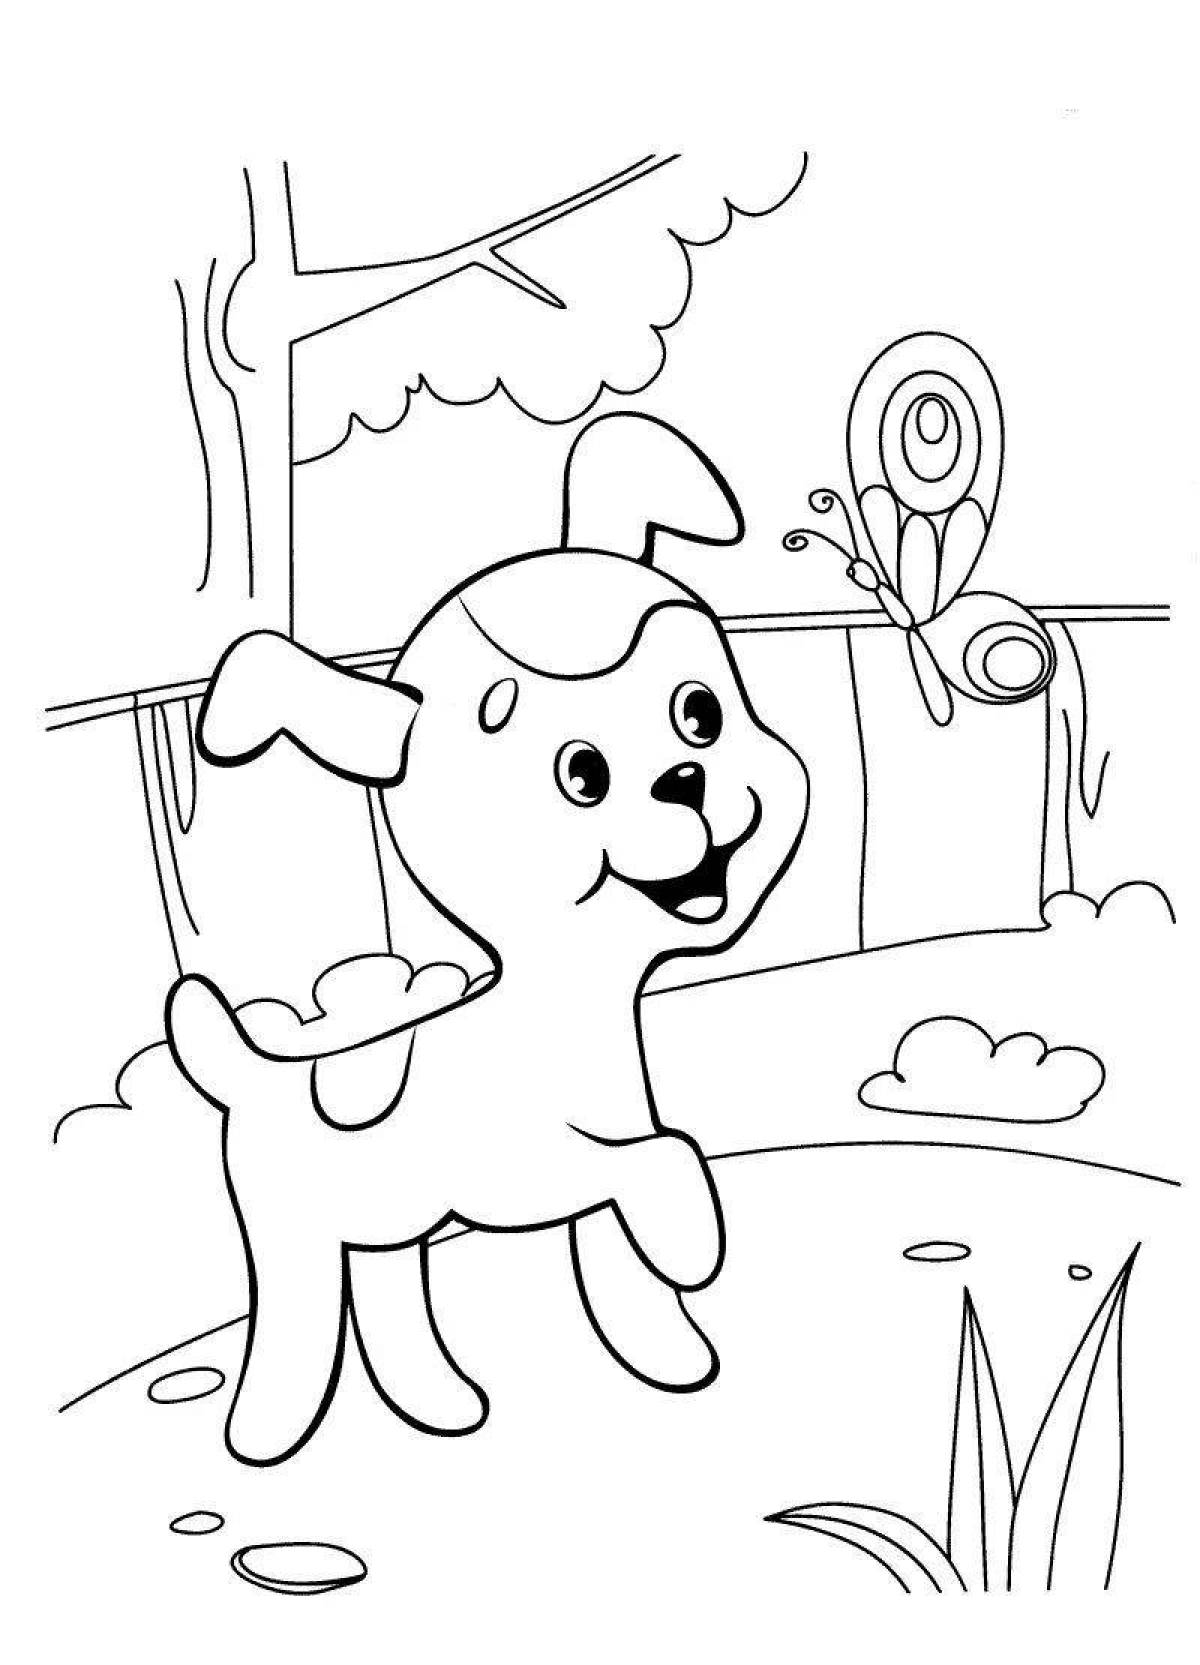 Coloring page inquisitive blue puppy